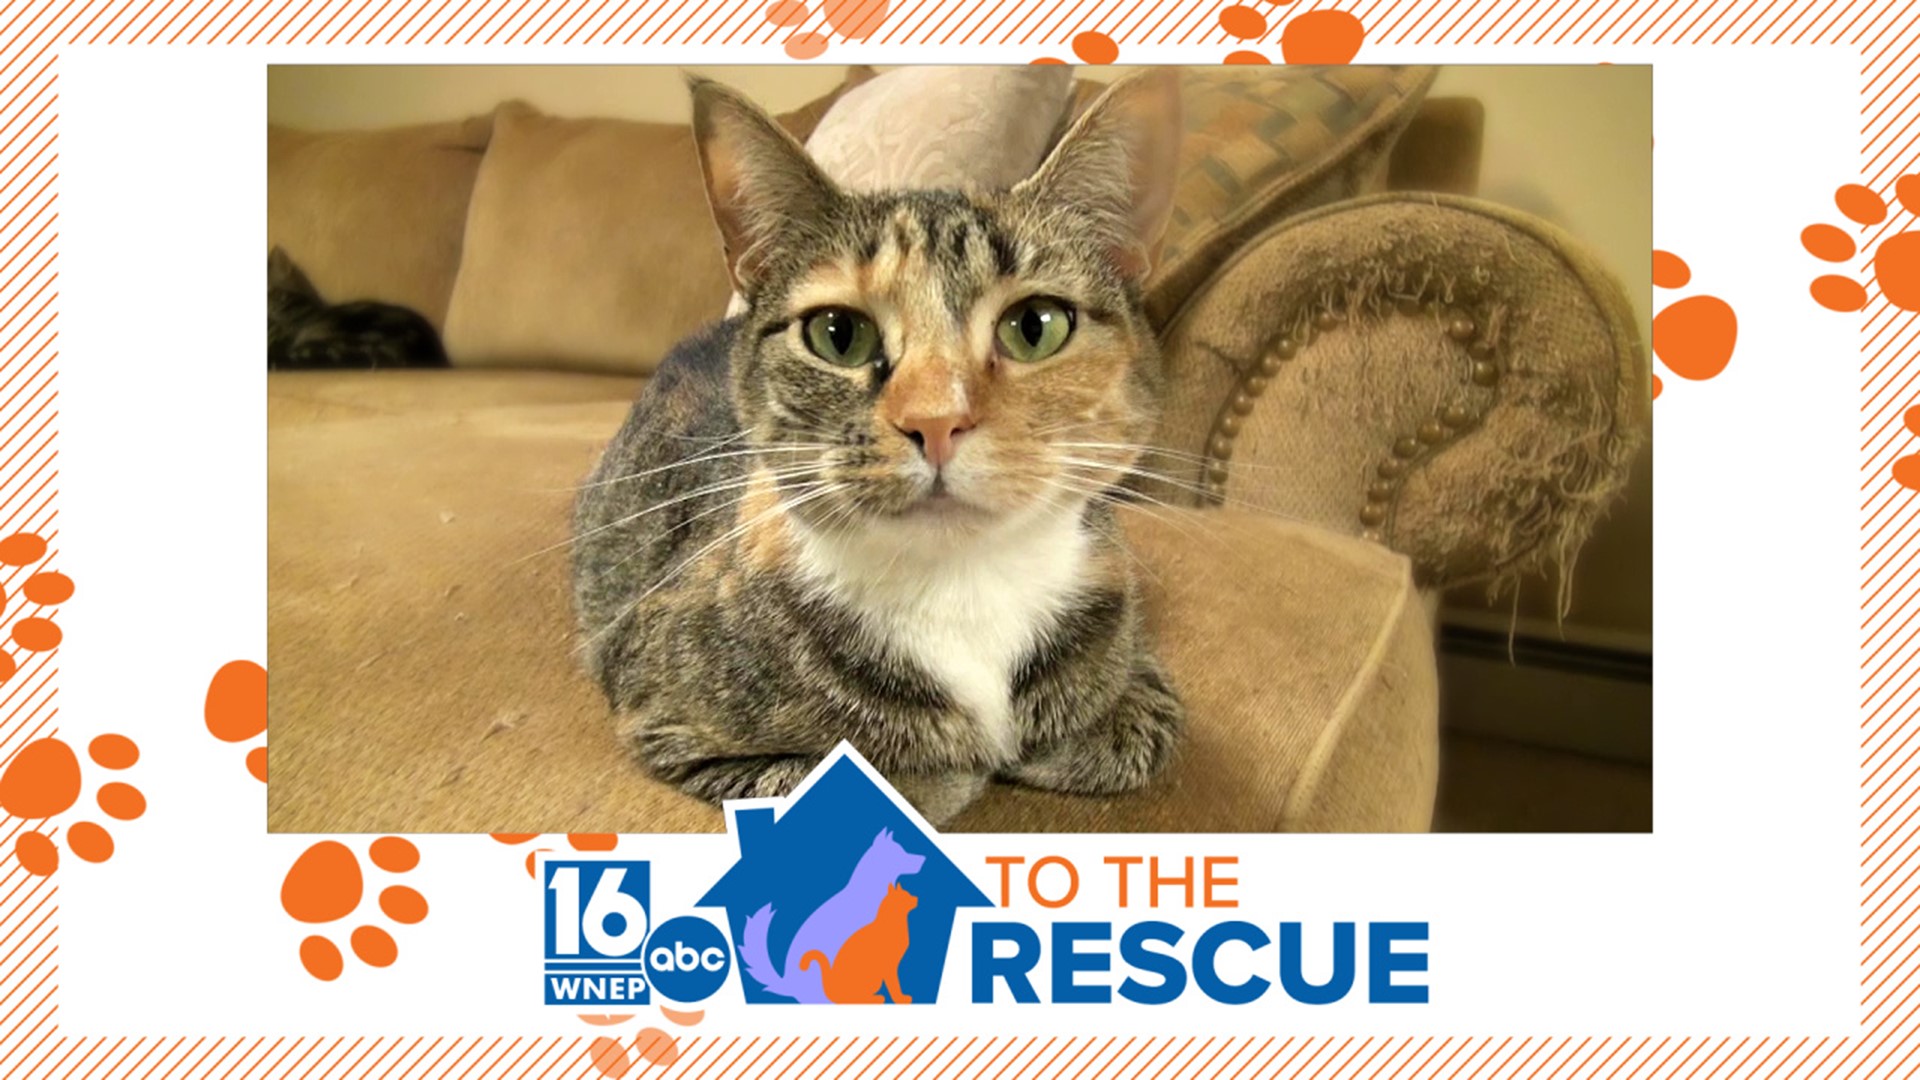 In this week's 16 To The Rescue, we meet a cat who was abandoned in an apartment with no food or water. Rescue workers want to make sure that never happens again.